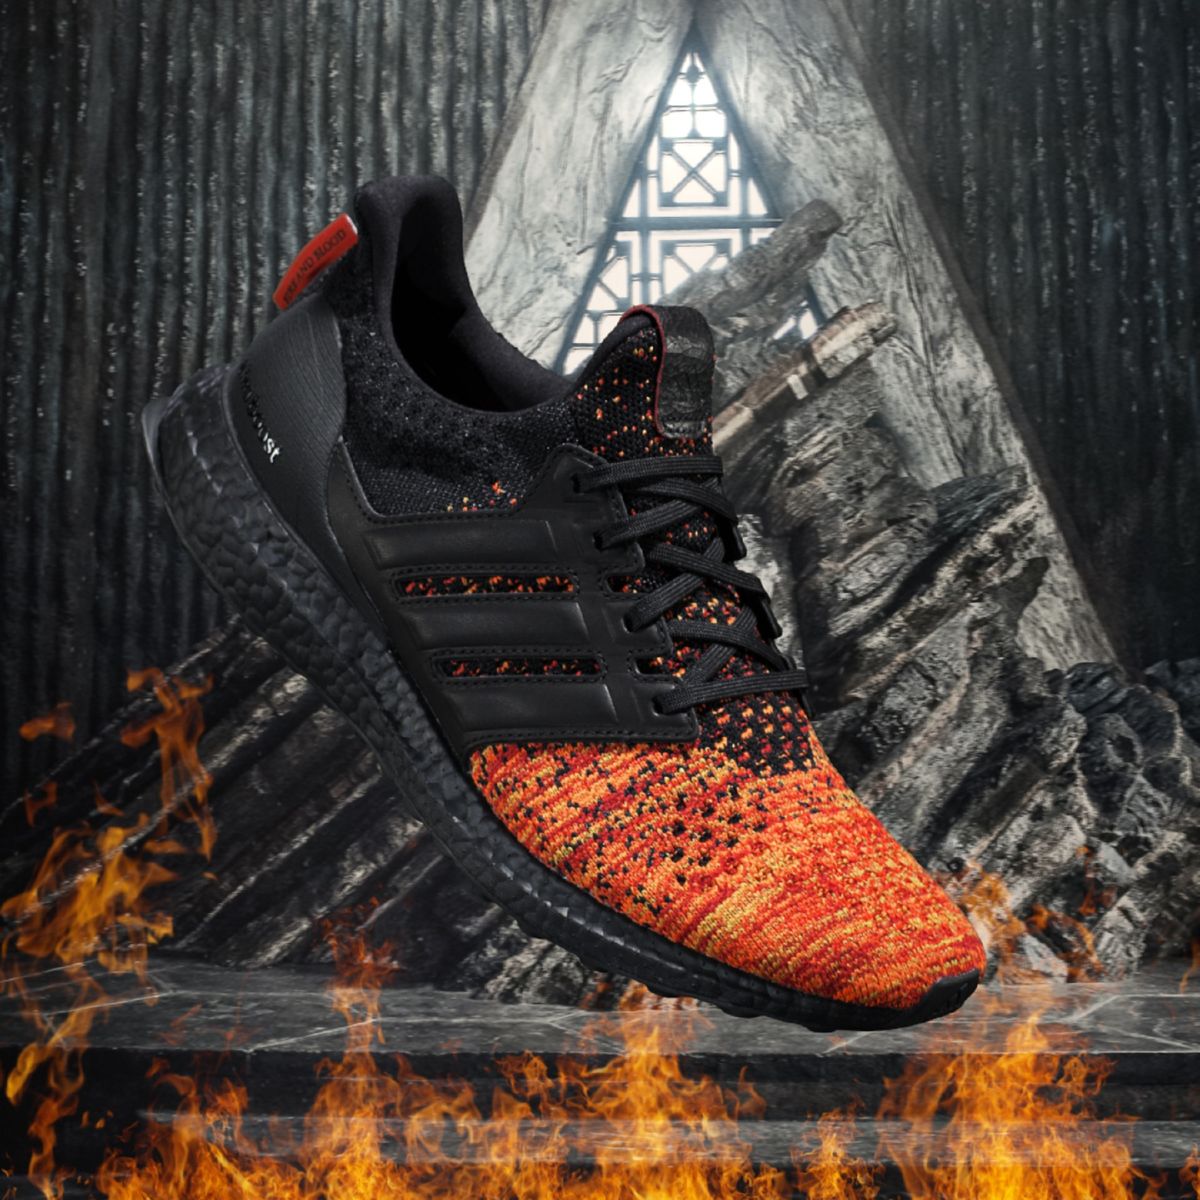 saludo cobertura cumpleaños The 'Game of Thrones' Adidas Ultra Boost Collection Finally Makes Its Debut